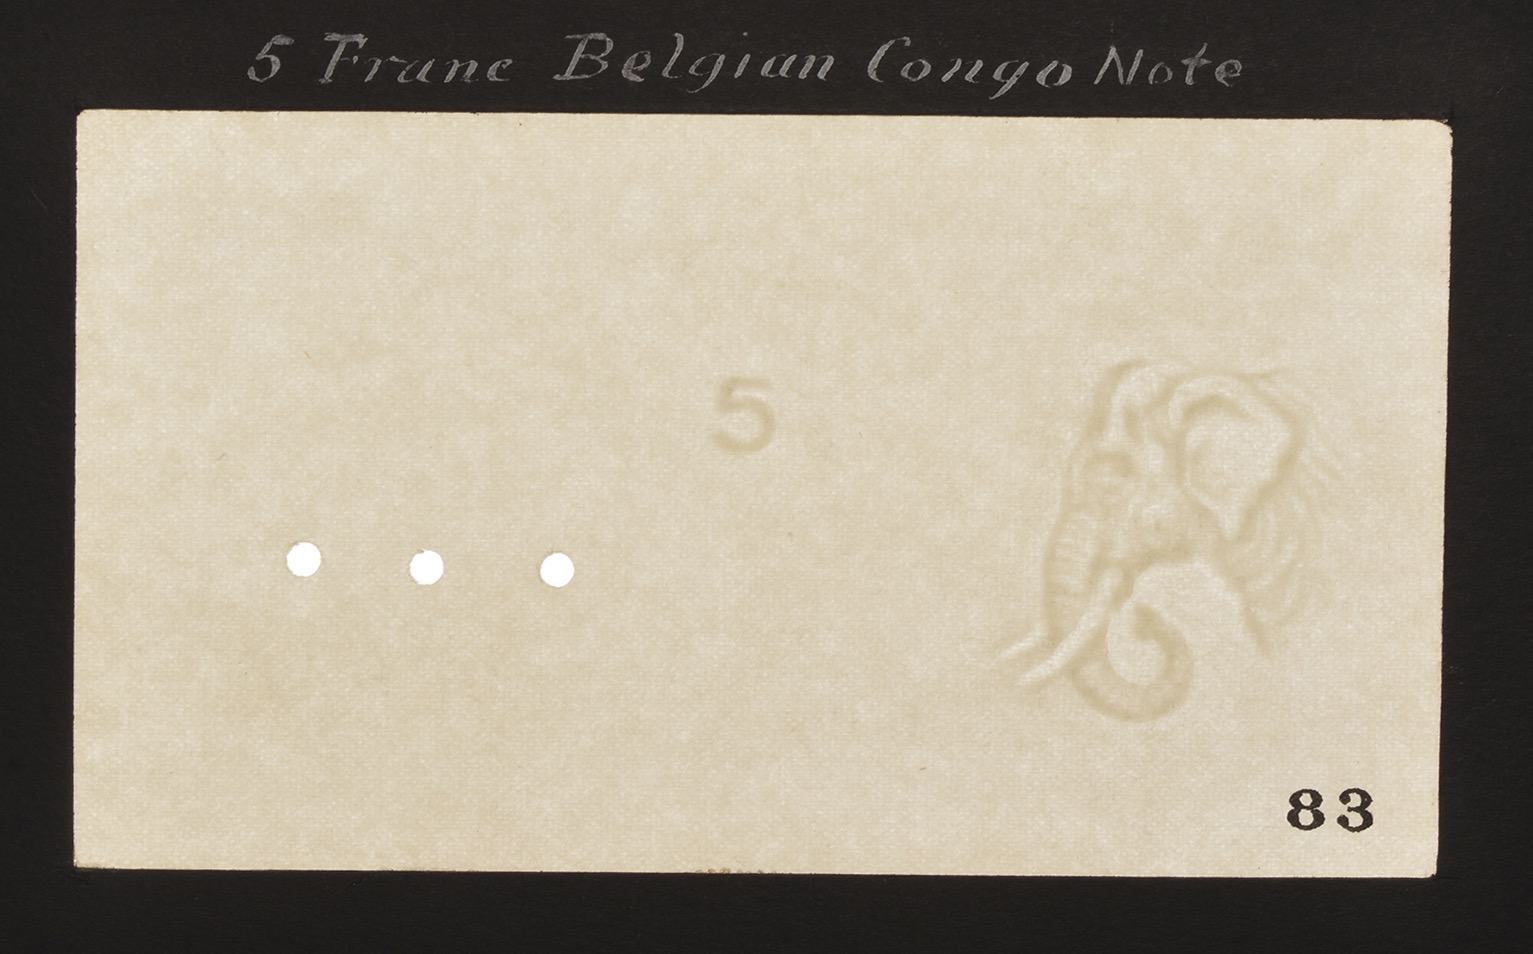 Banque du Congo Belge, watermarked paper (3) as used on the 5 Franc of 1924-30, glued into... - Image 2 of 3